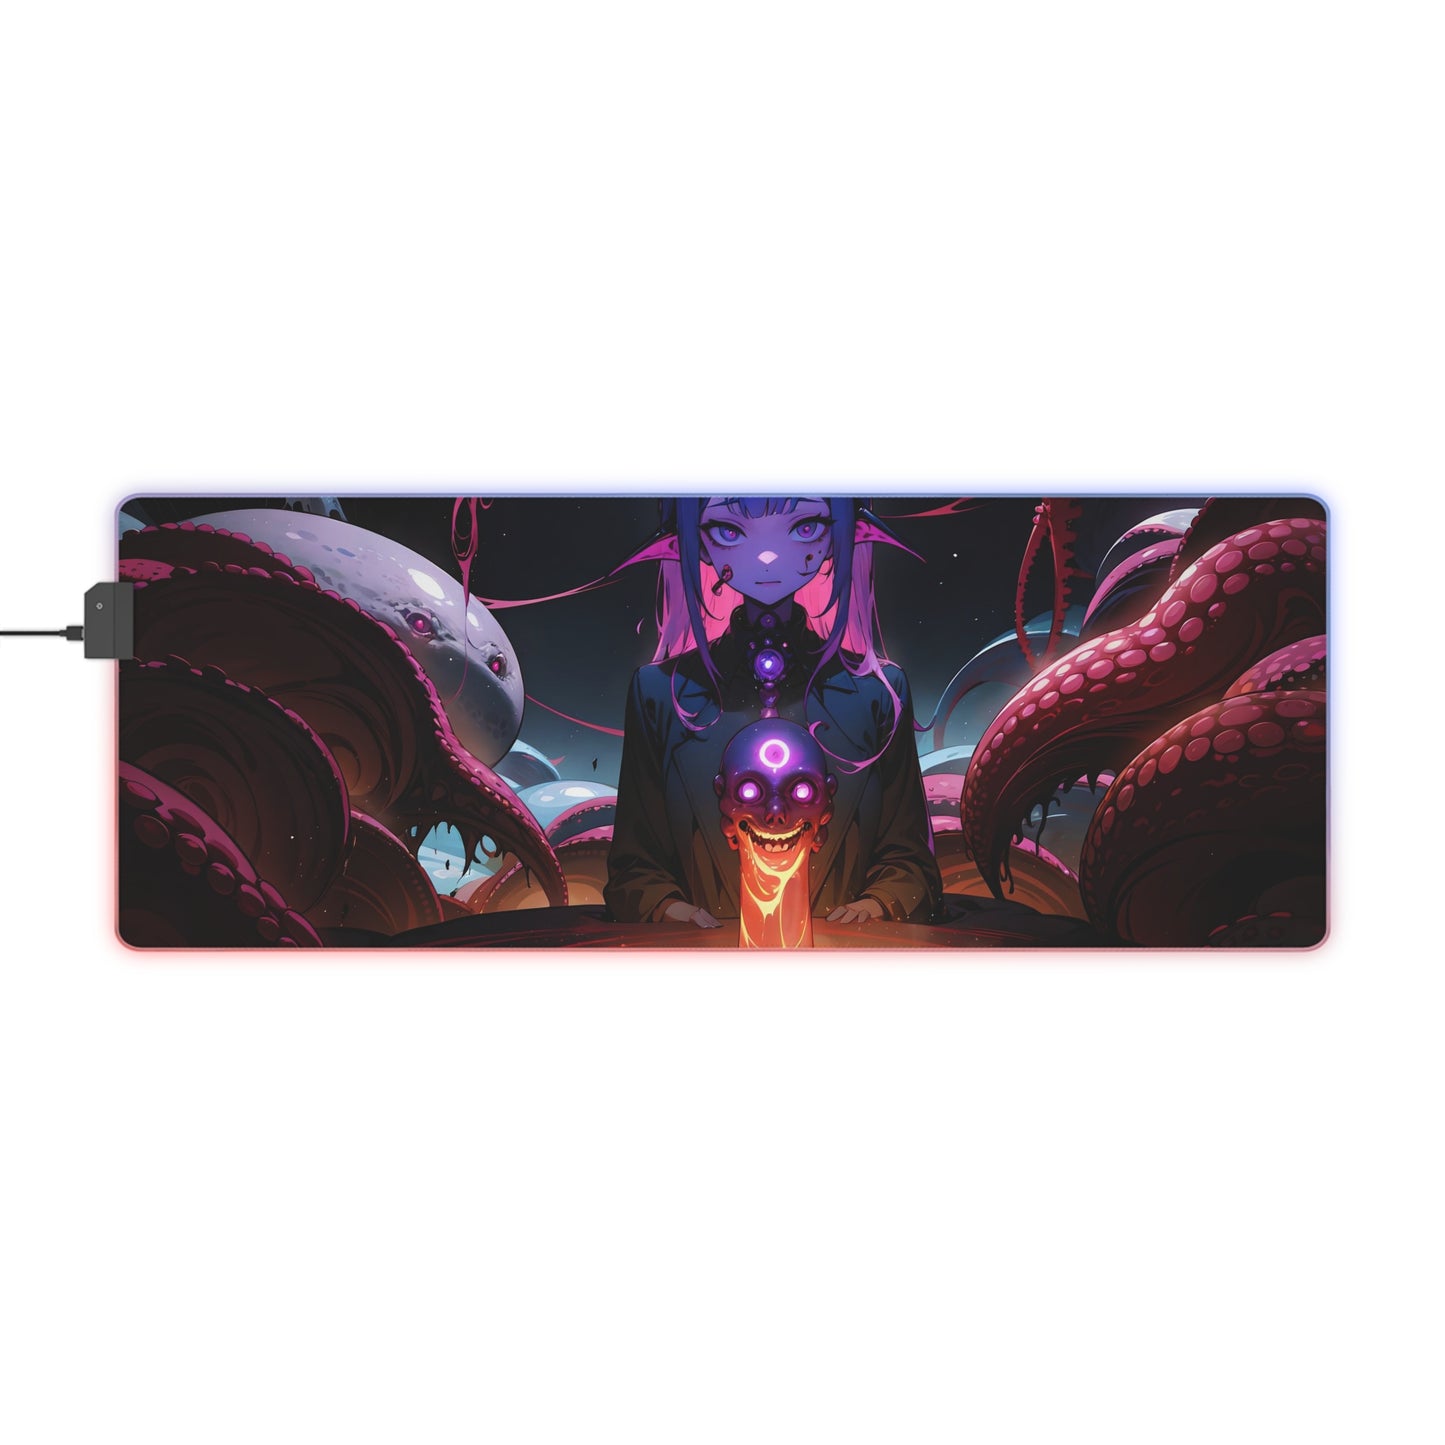 LCAM-19 LED Gaming Mouse Pad